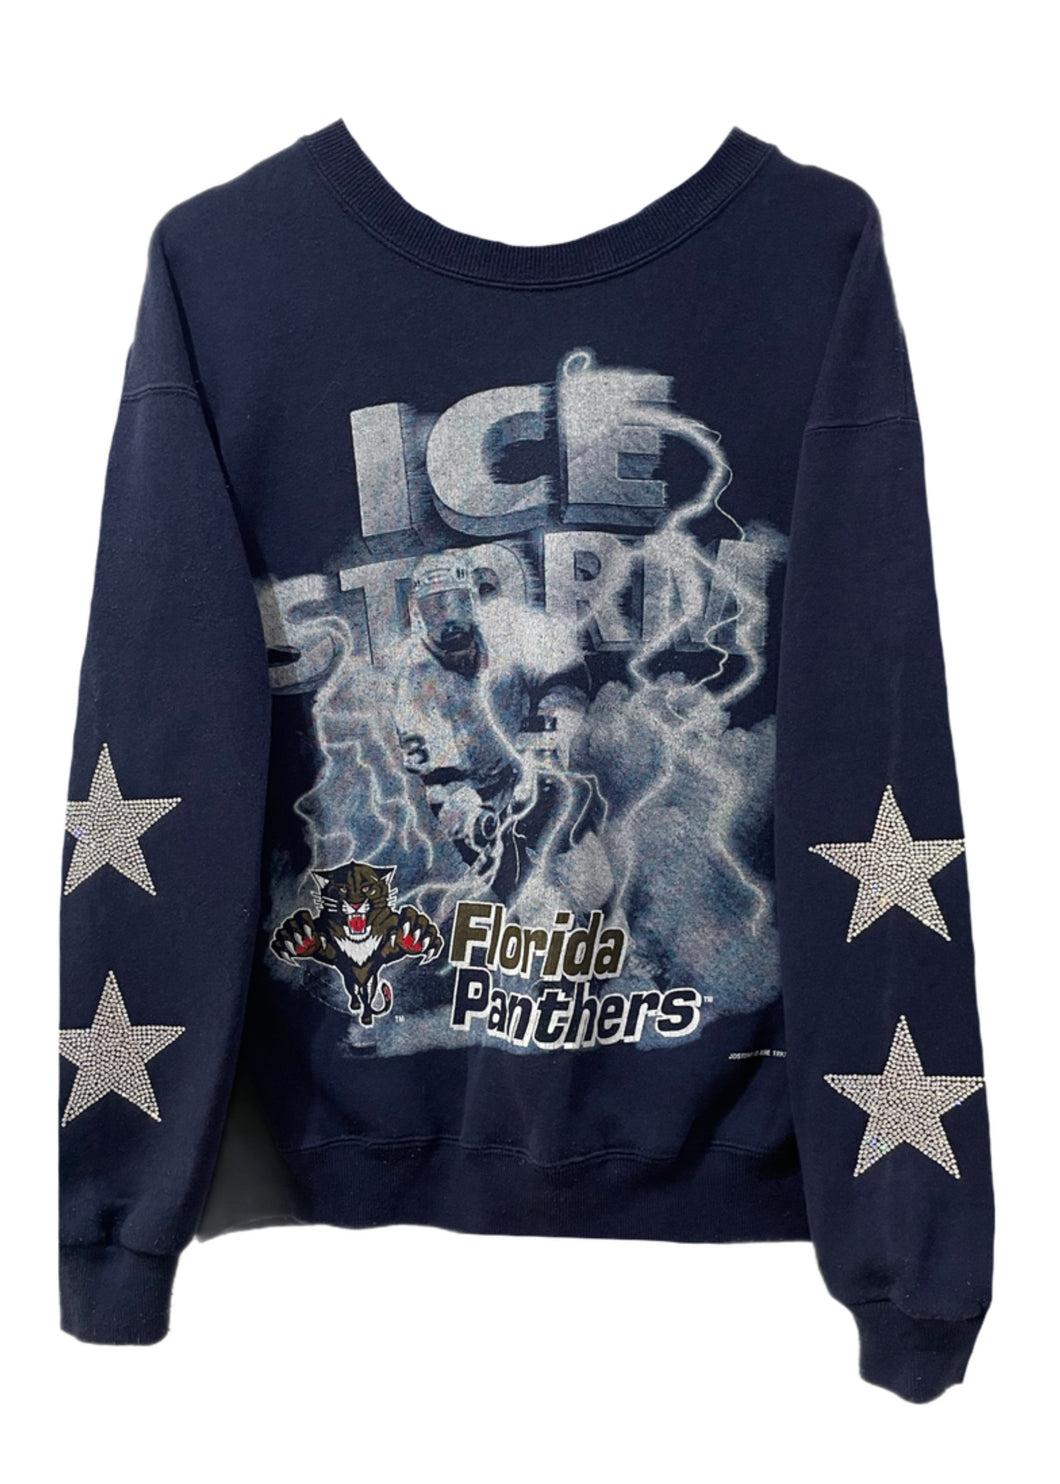 Florida Panthers, NHL One of a KIND Vintage Sweatshirt with Crystal Star Design